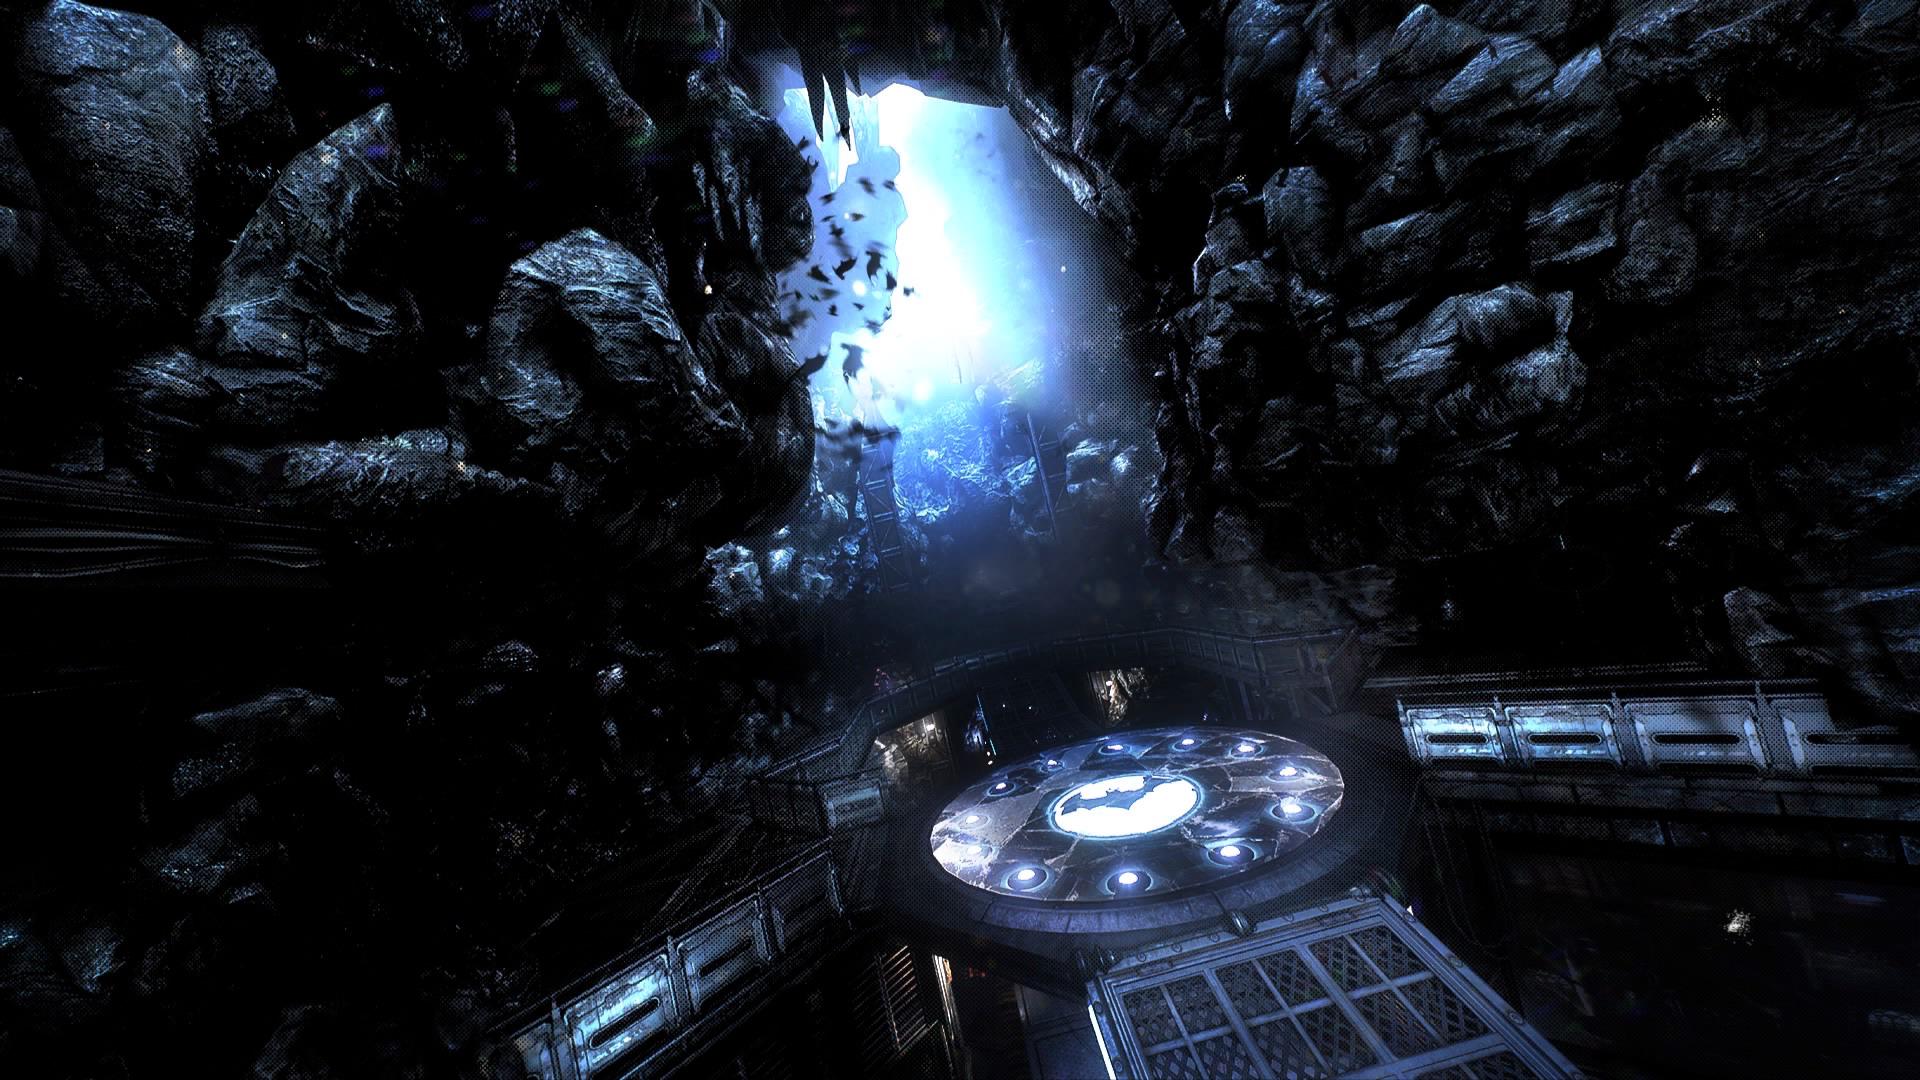 Just Sharing A Screenshot Wallpaper! This Is The Batcave From The Predator Map In Batman Arkham Knight. [Screenshot ]